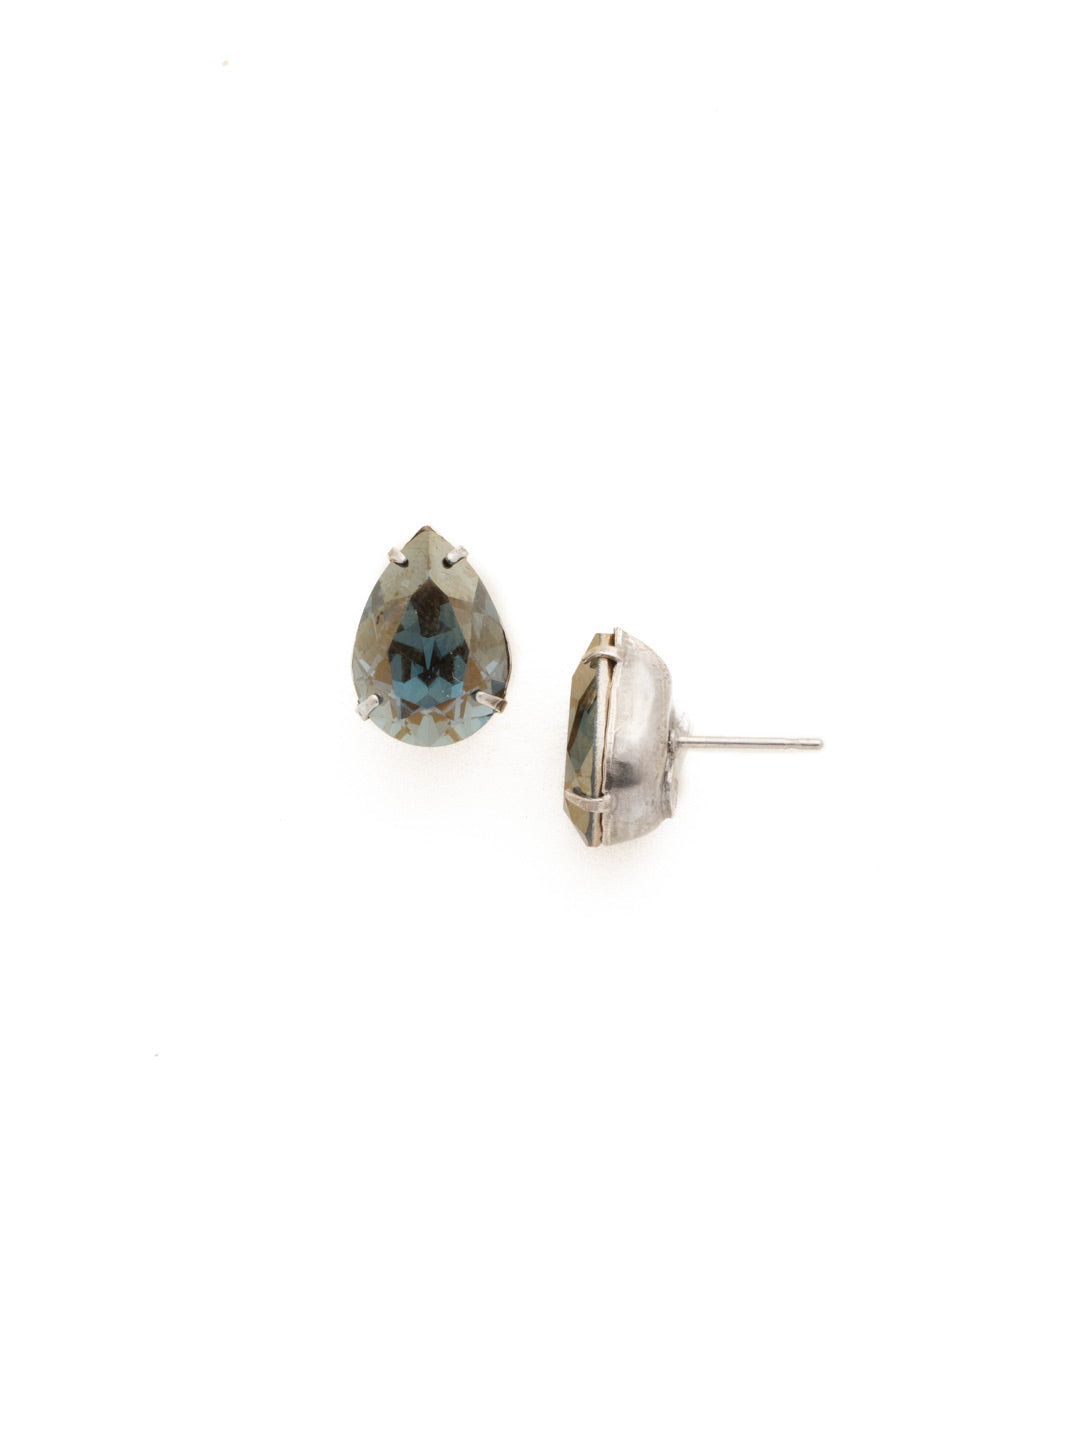 Ginnie Stud Earrings - ECR115ASBBR - <p>A beautiful basic stud. These classic single teardrop post earrings are perfect for any occasion, especially the everyday look. A timeless treasure that will sparkle season after season. From Sorrelli's Blue Brocade collection in our Antique Silver-tone finish.</p>